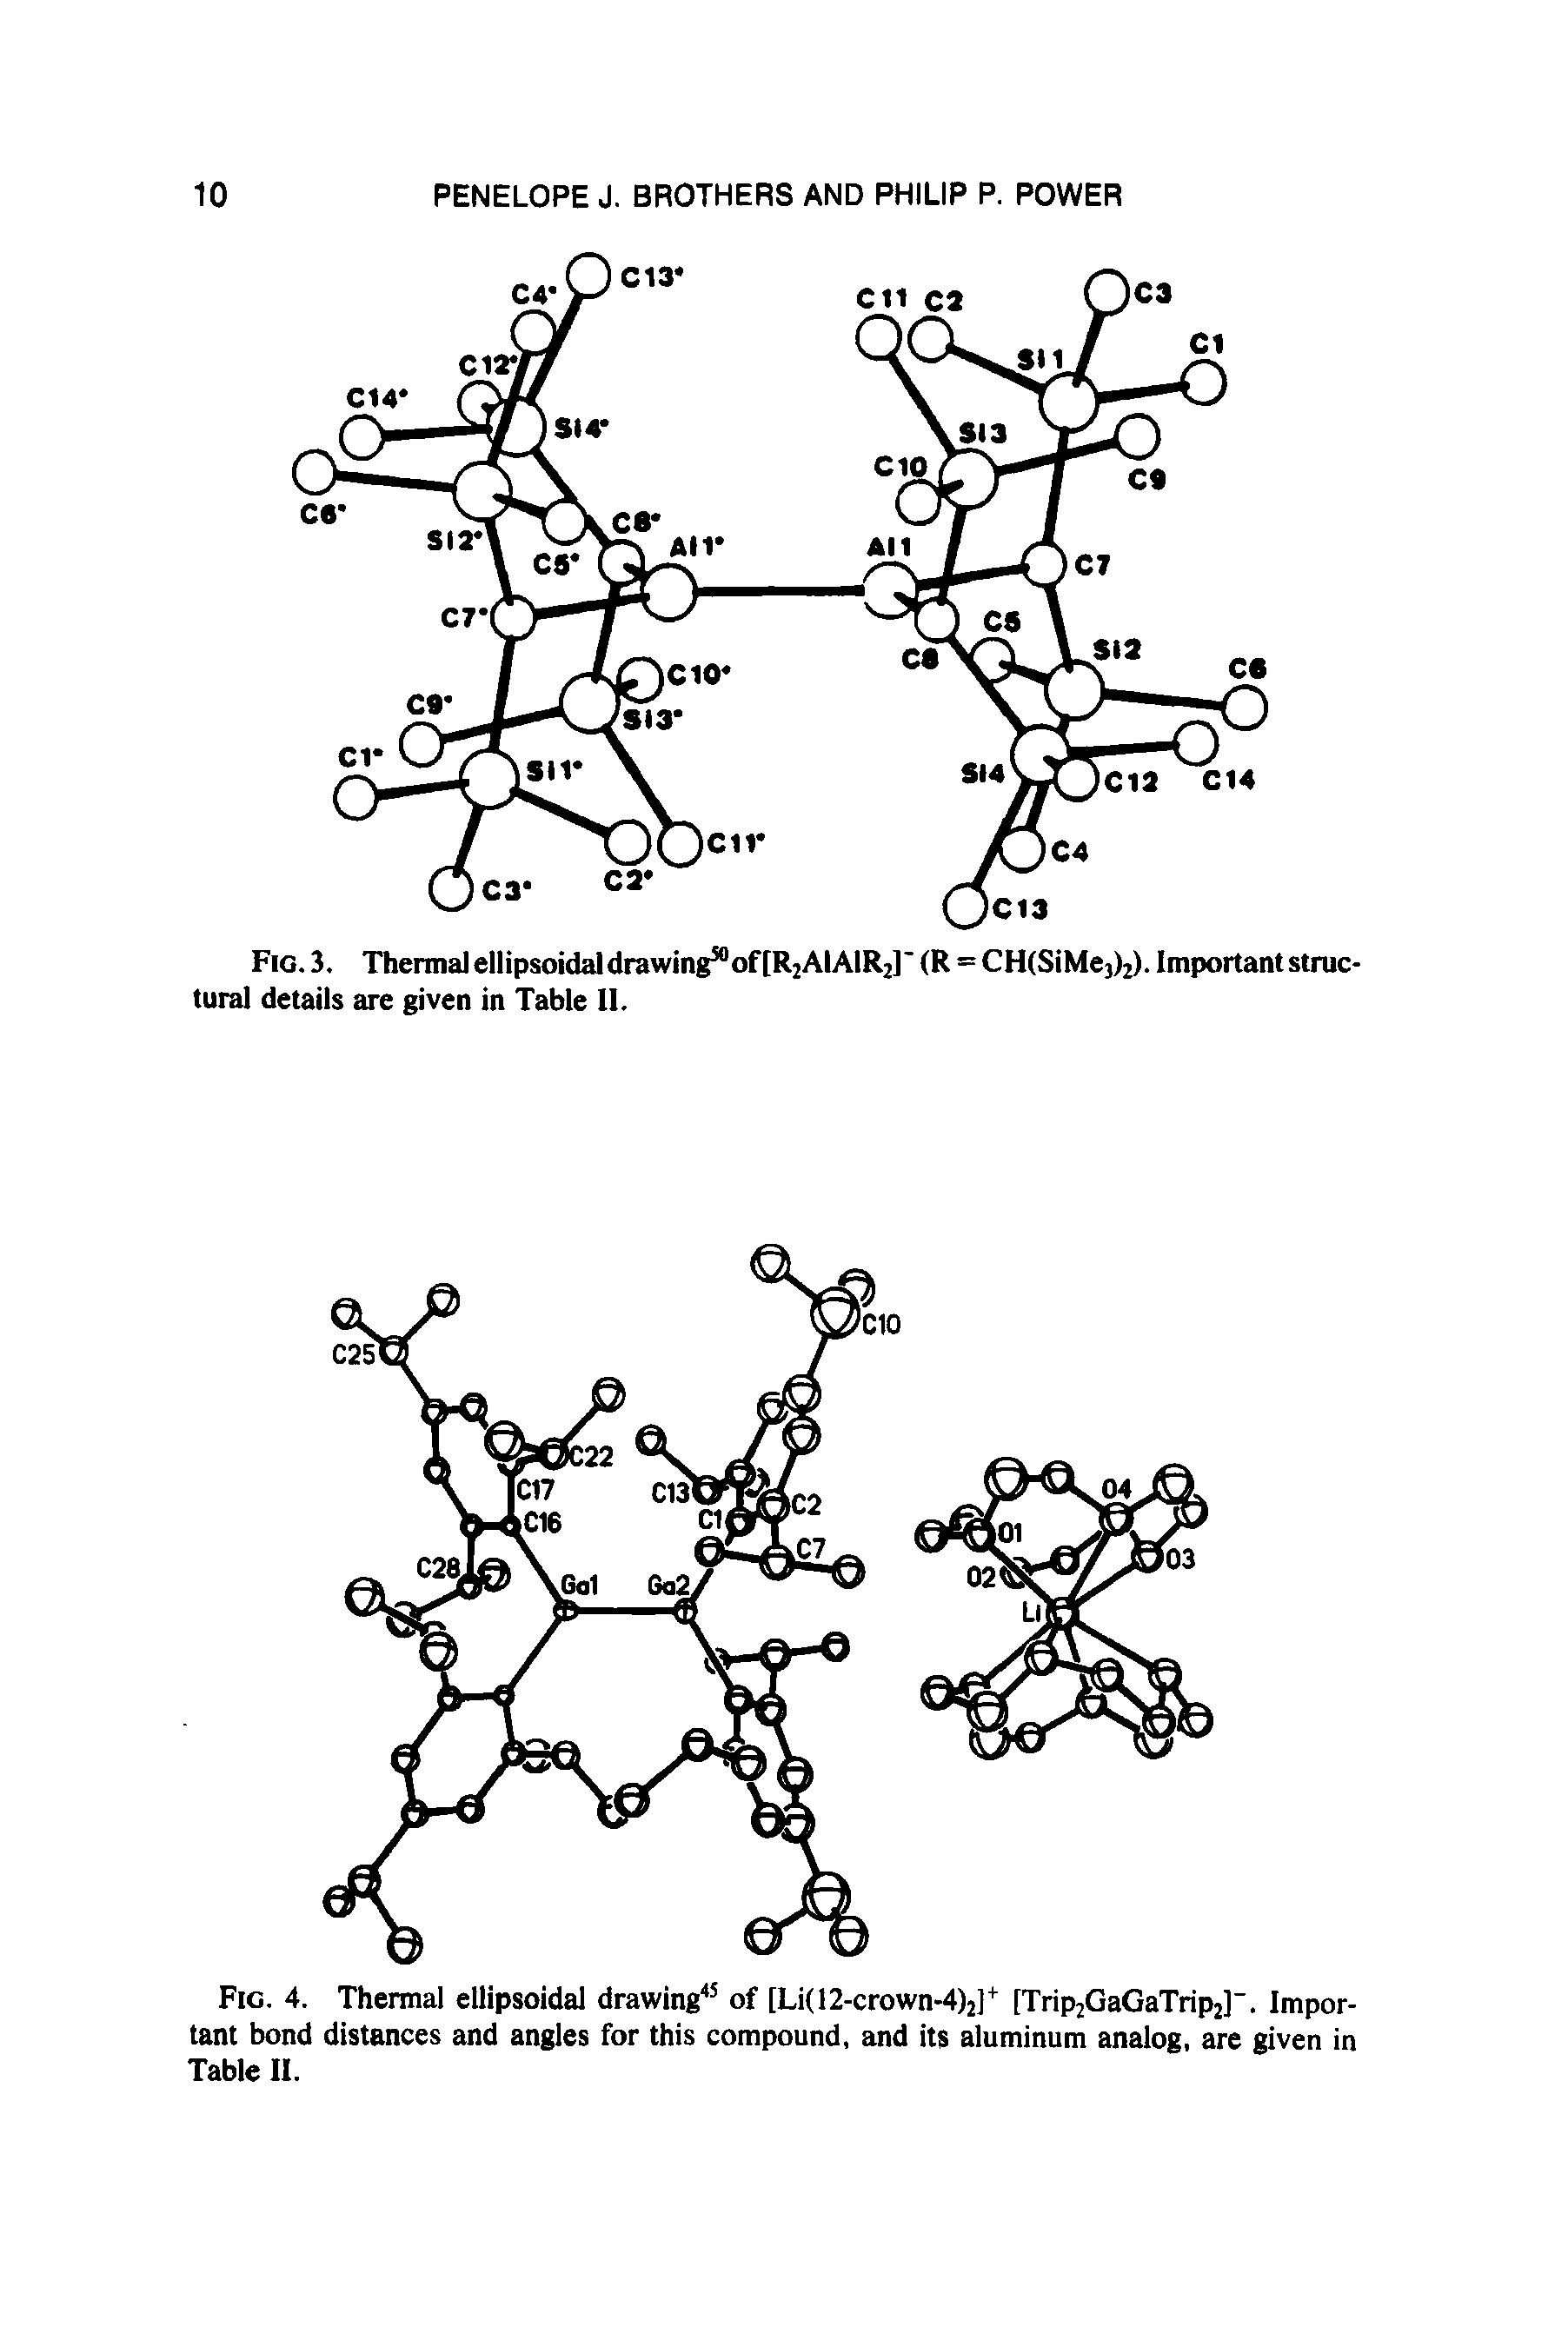 Fig. 4. Thermal ellipsoidal drawing45 of [Li(12-crown-4)2]+ [Trip2GaGaTrip2]. Important bond distances and angles for this compound, and its aluminum analog, are given in Table II.